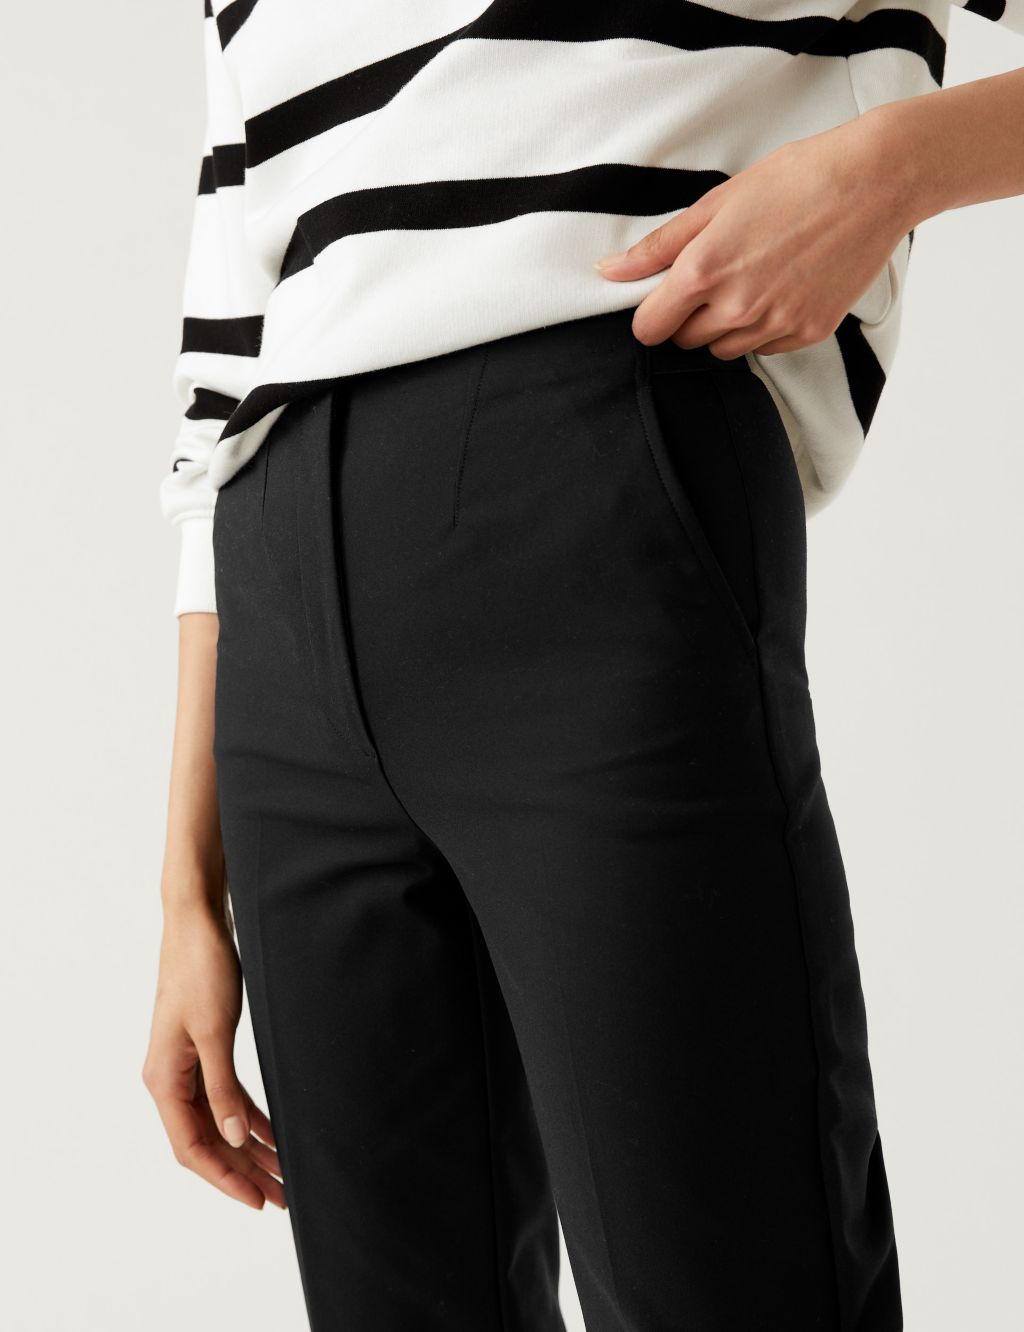 Cotton Blend Slim Fit Cropped Trousers image 3